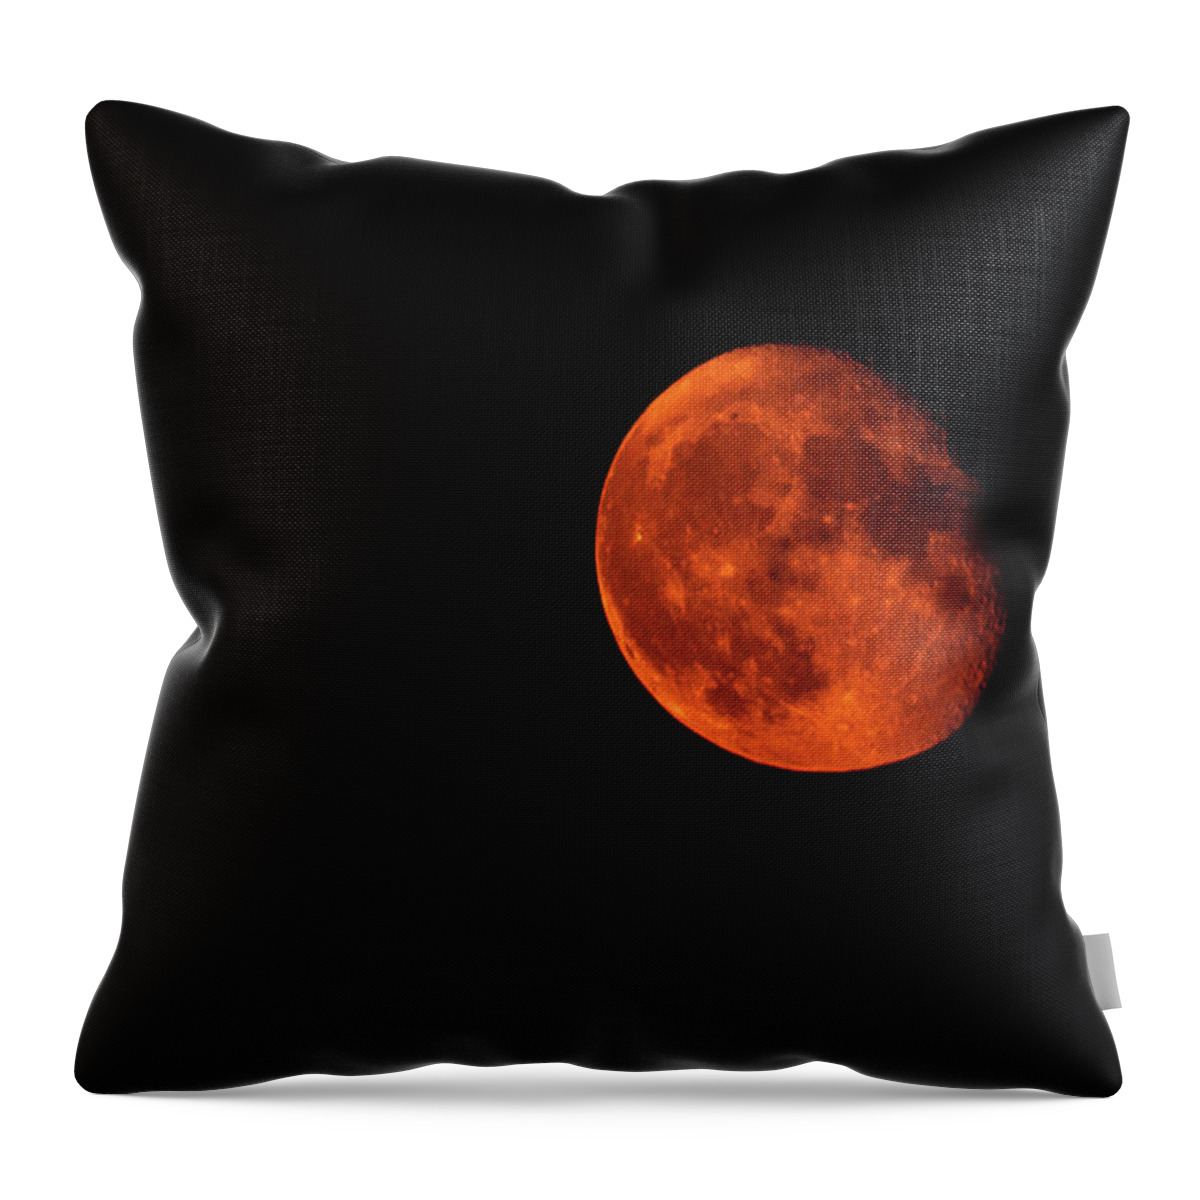 Waning Gibbous Phase Throw Pillow featuring the photograph Orange Moon by Denise Kopko